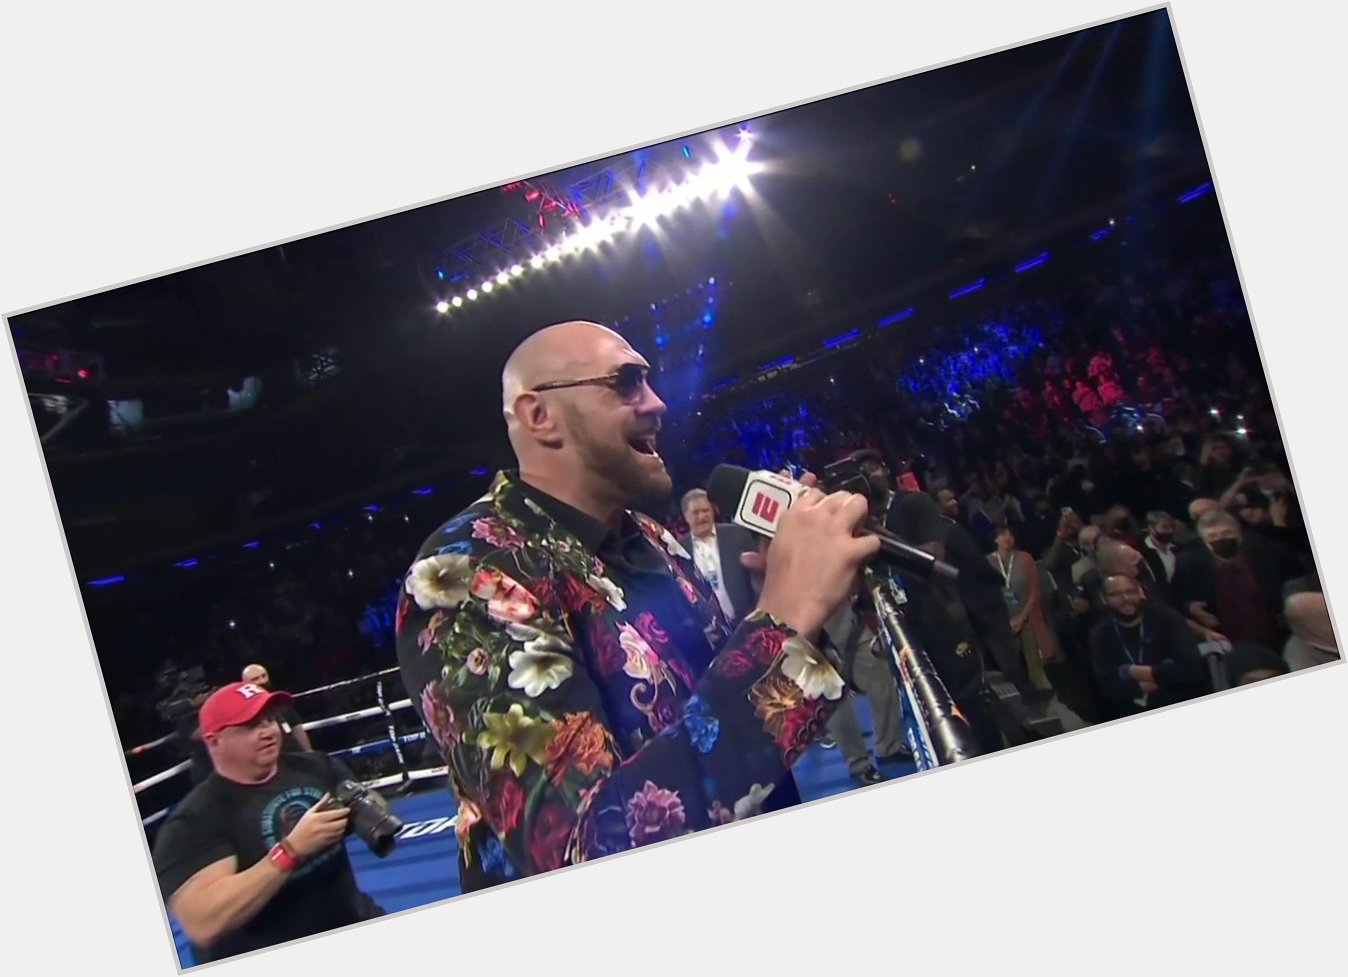 Tyson Fury was a surprise guest at Madison Square Garden and led the crowd in singing happy birthday to Bob Arum  